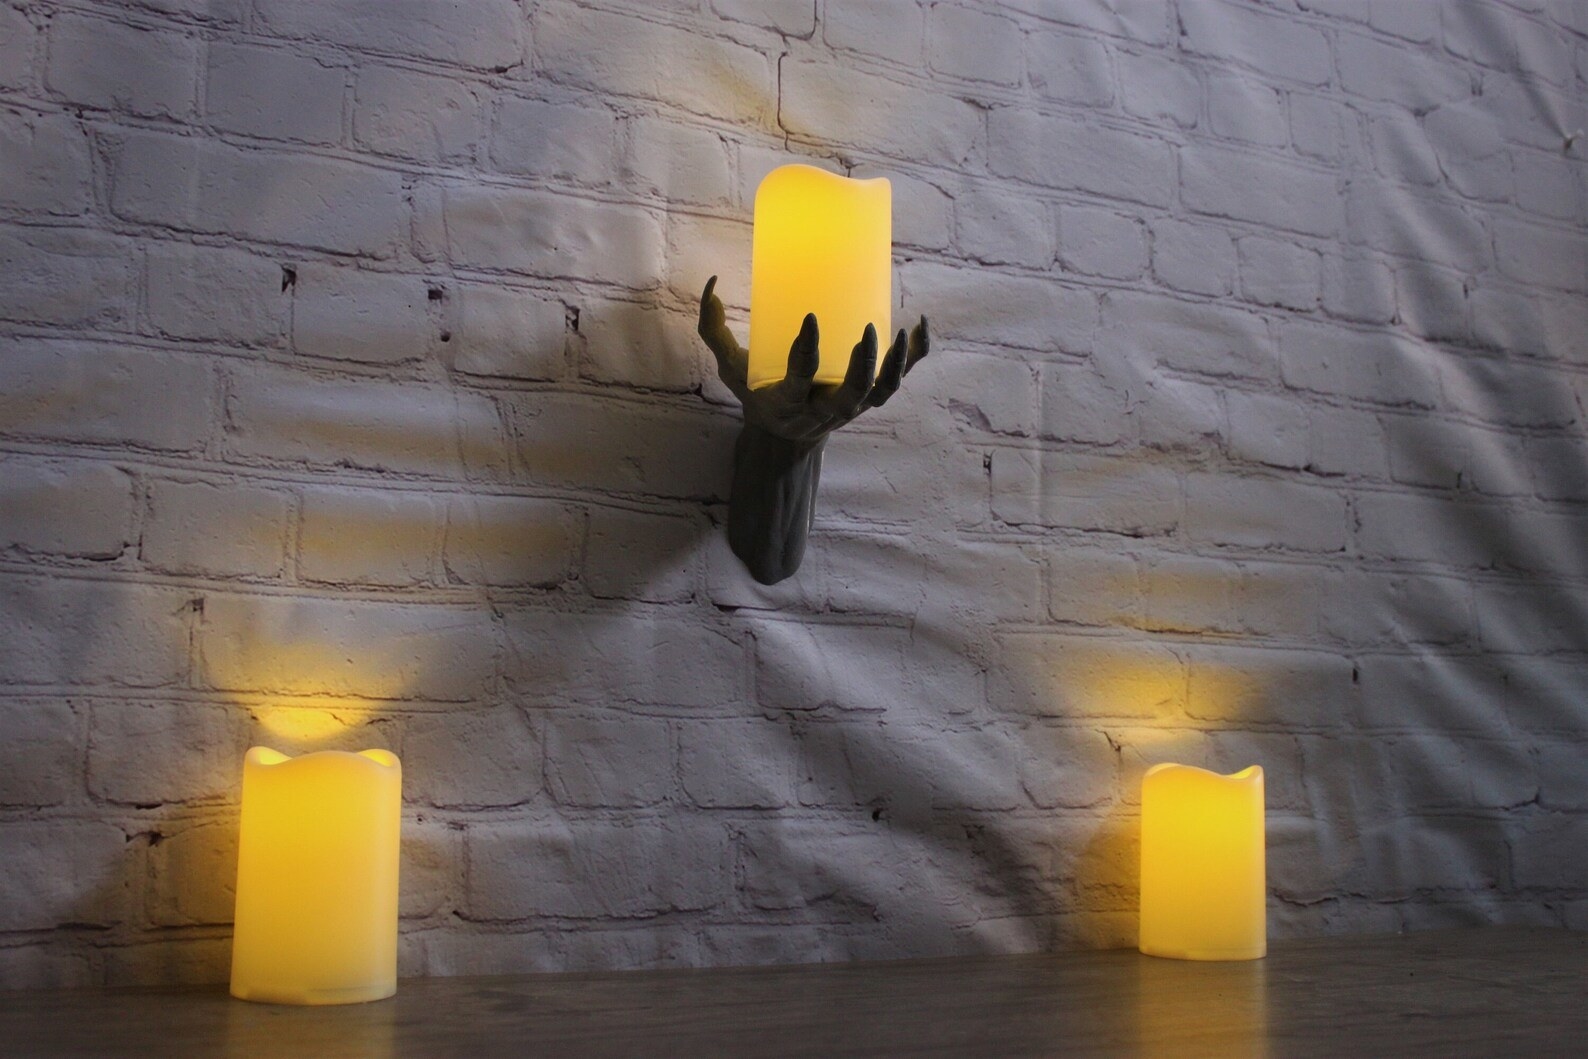 creepy 3D printing hand mounted to the wall holding an LED candle